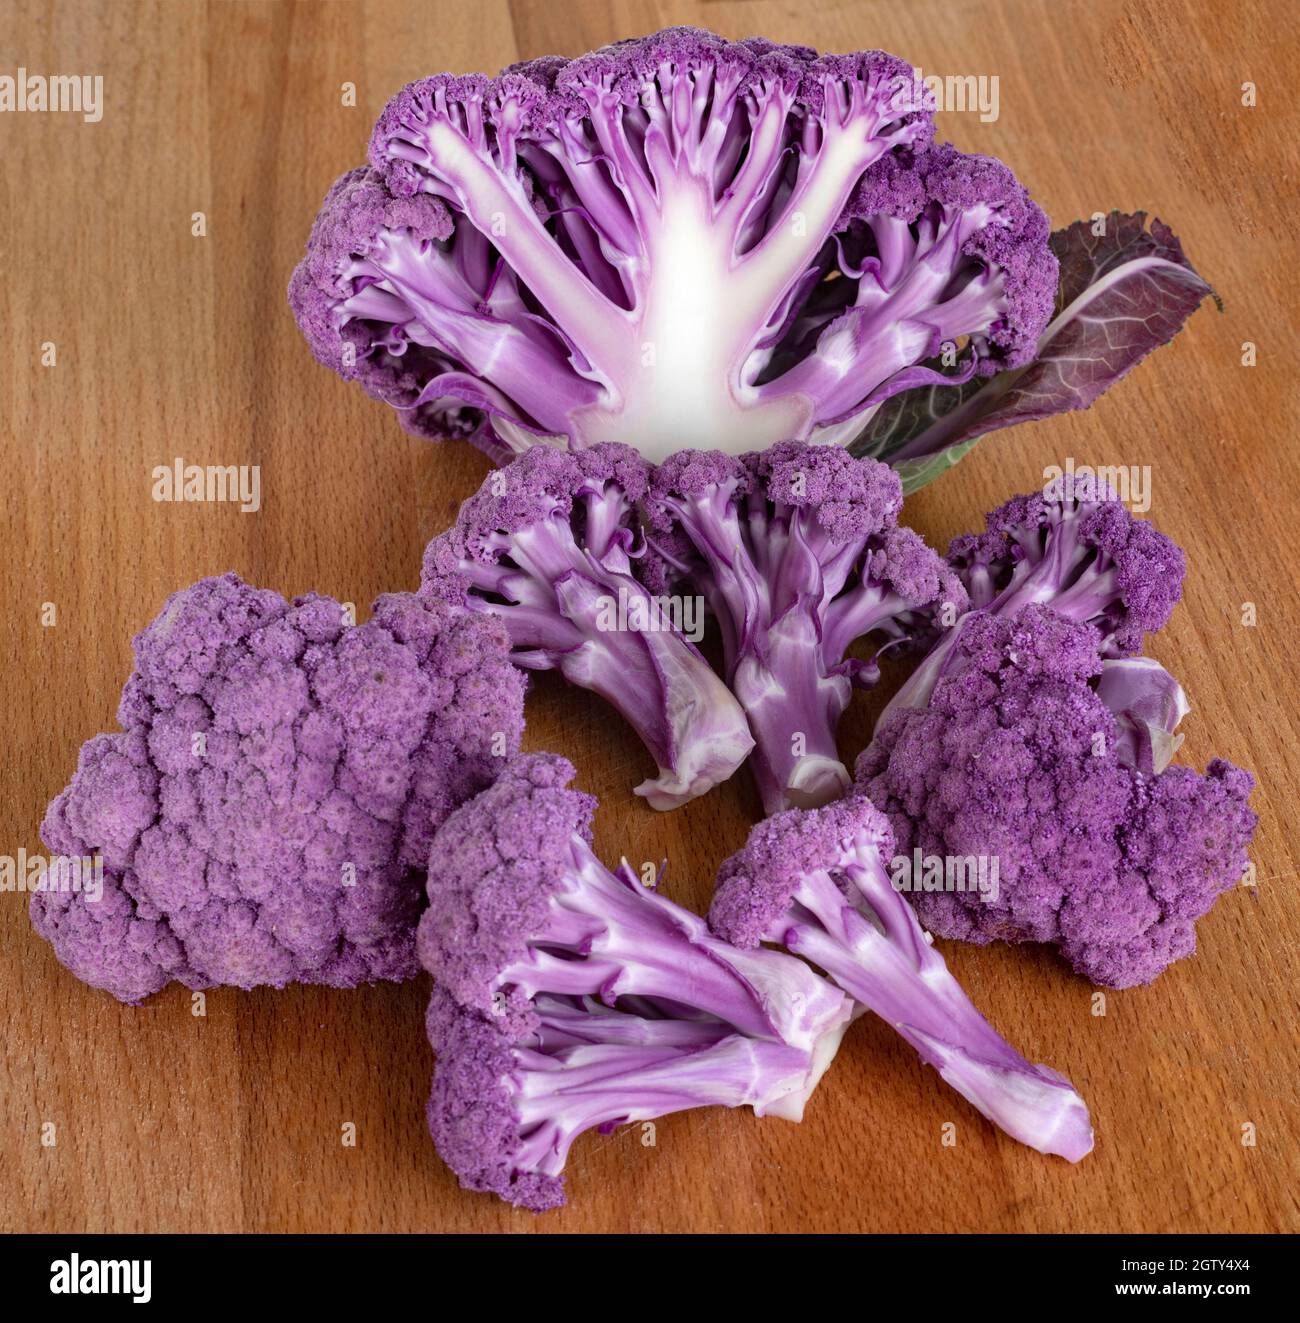 Close-up Of Purple Cauliflowers On Wooden Table Stock Photo